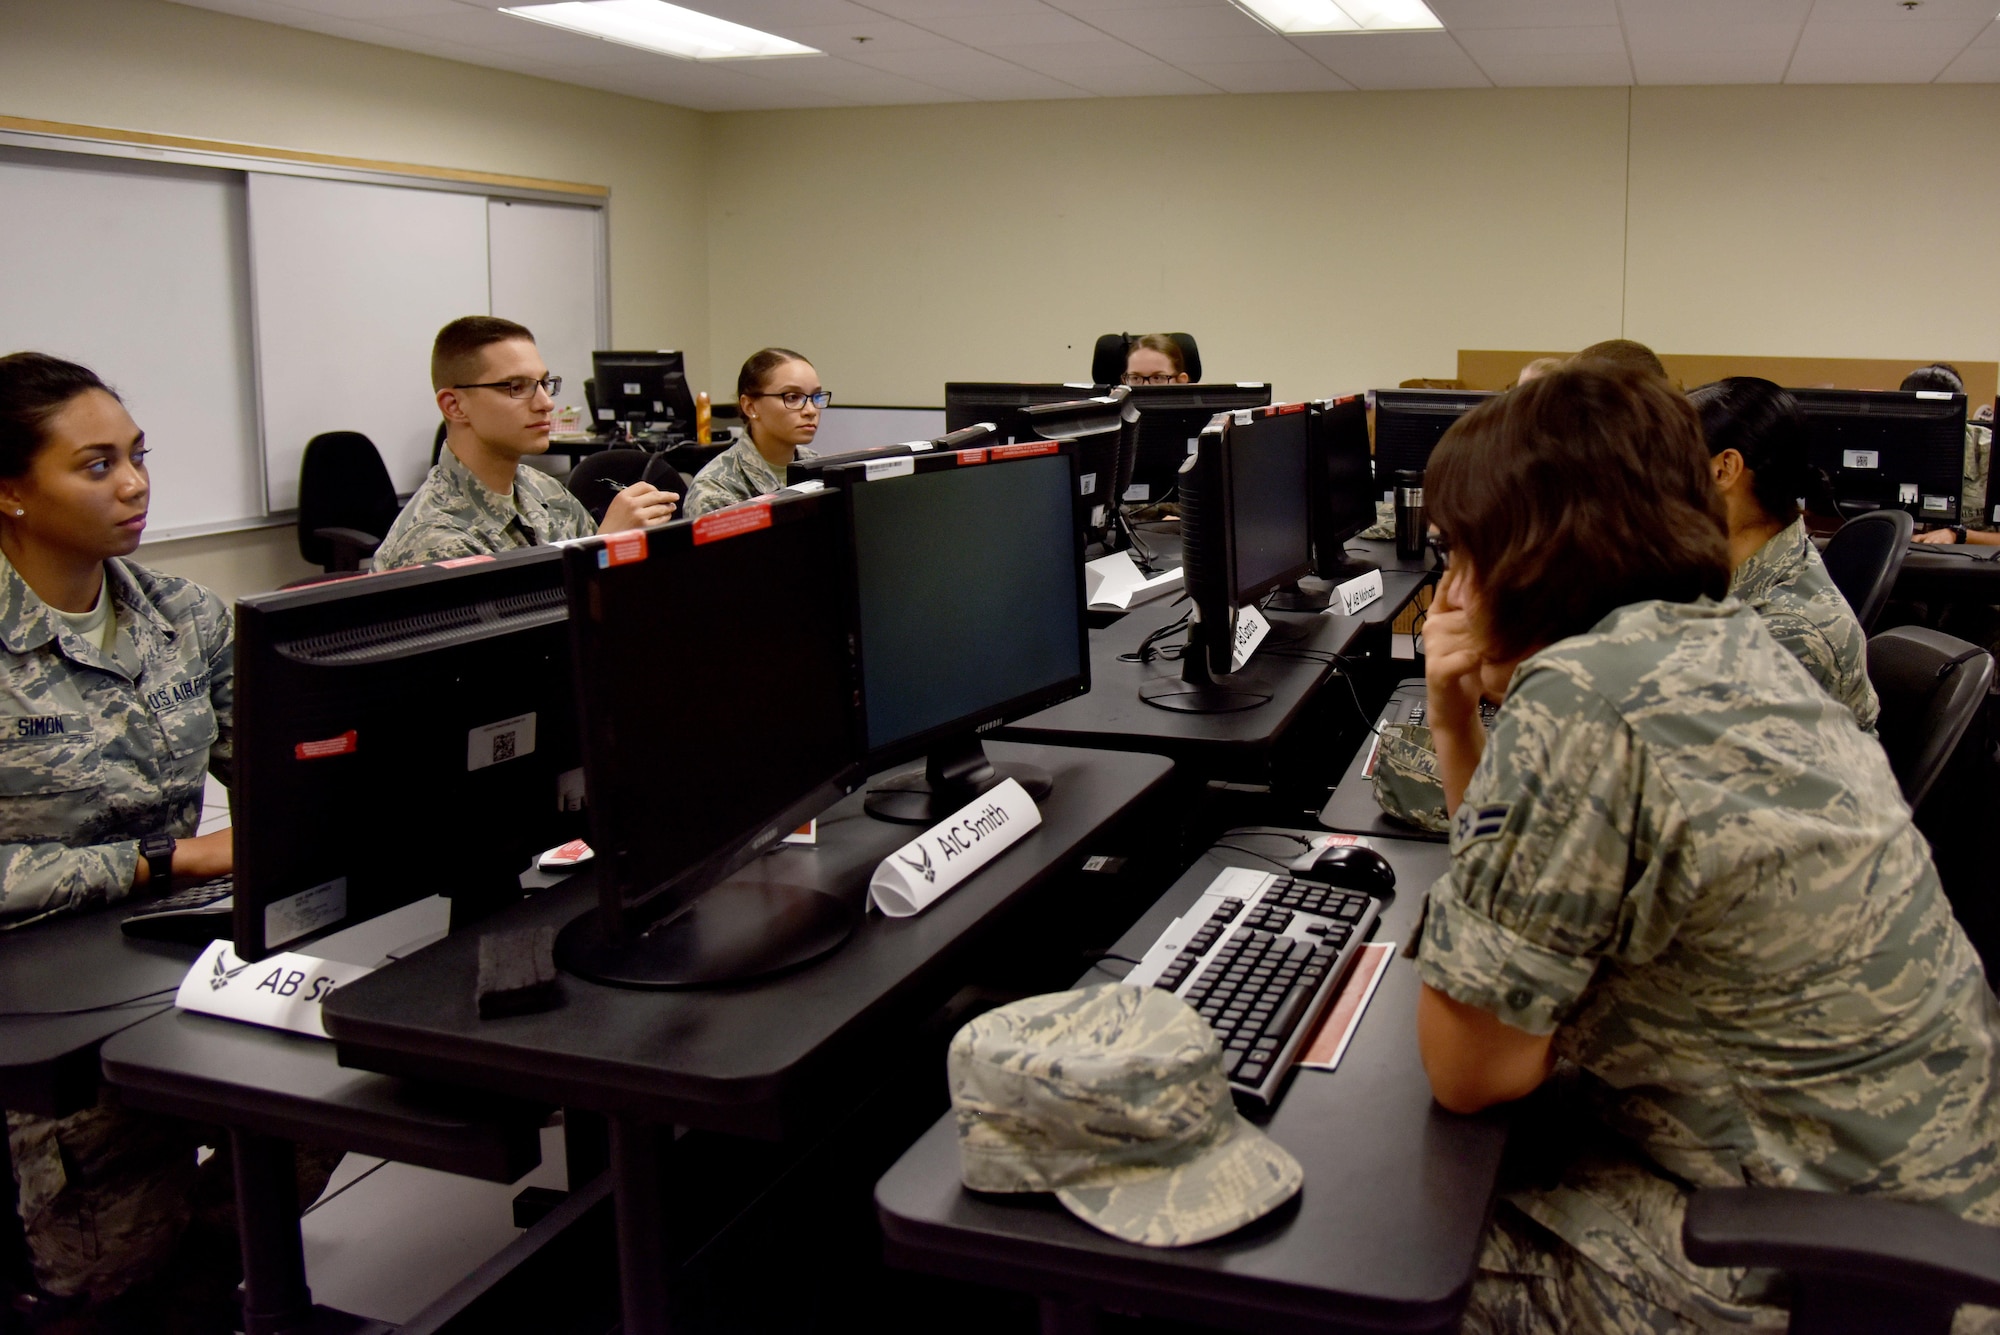 315th Training Squadron students sit in one of the old-style classrooms at the Di Tommaso Hall on Goodfellow Air Force Base, Texas, June 21, 2017. The 315th TRS is currently in the process of updating its classrooms to foster a better learning environment for students. (U.S. Air Force photo by Staff Sgt. Joshua Edwards/Released)